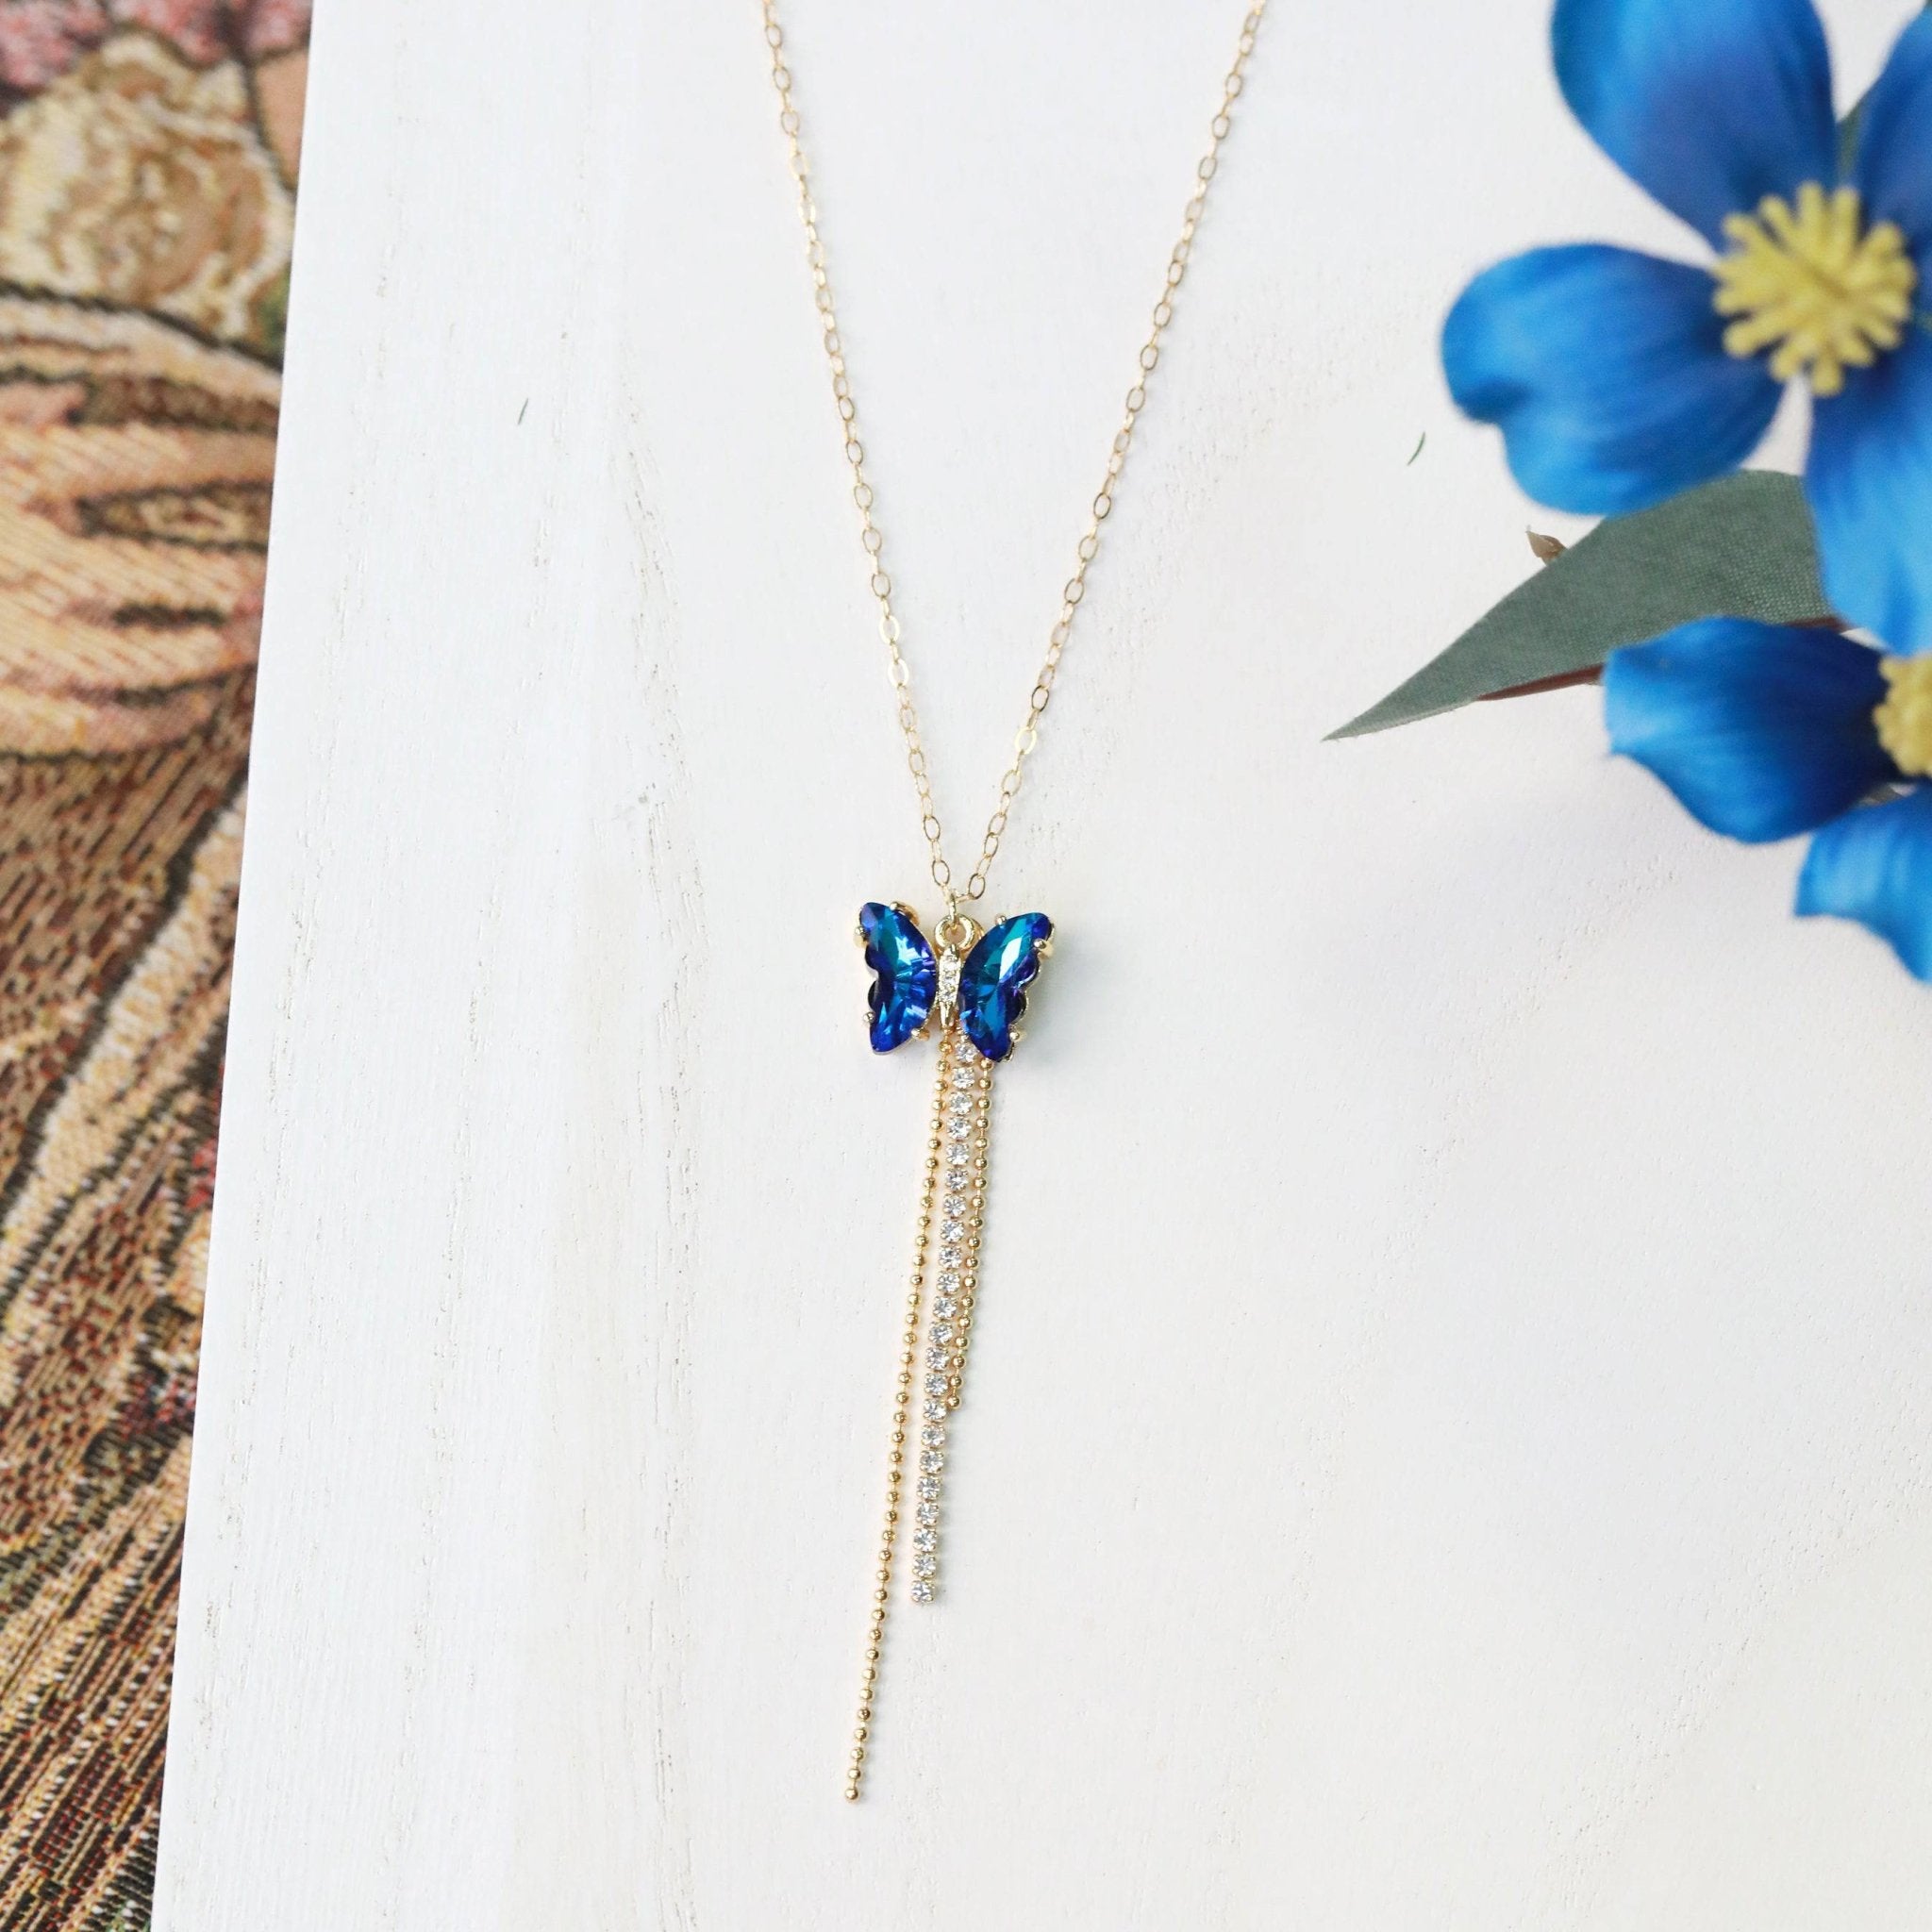 Crystal Butterfly Necklace with Fringe Drop - The Gilded Witch